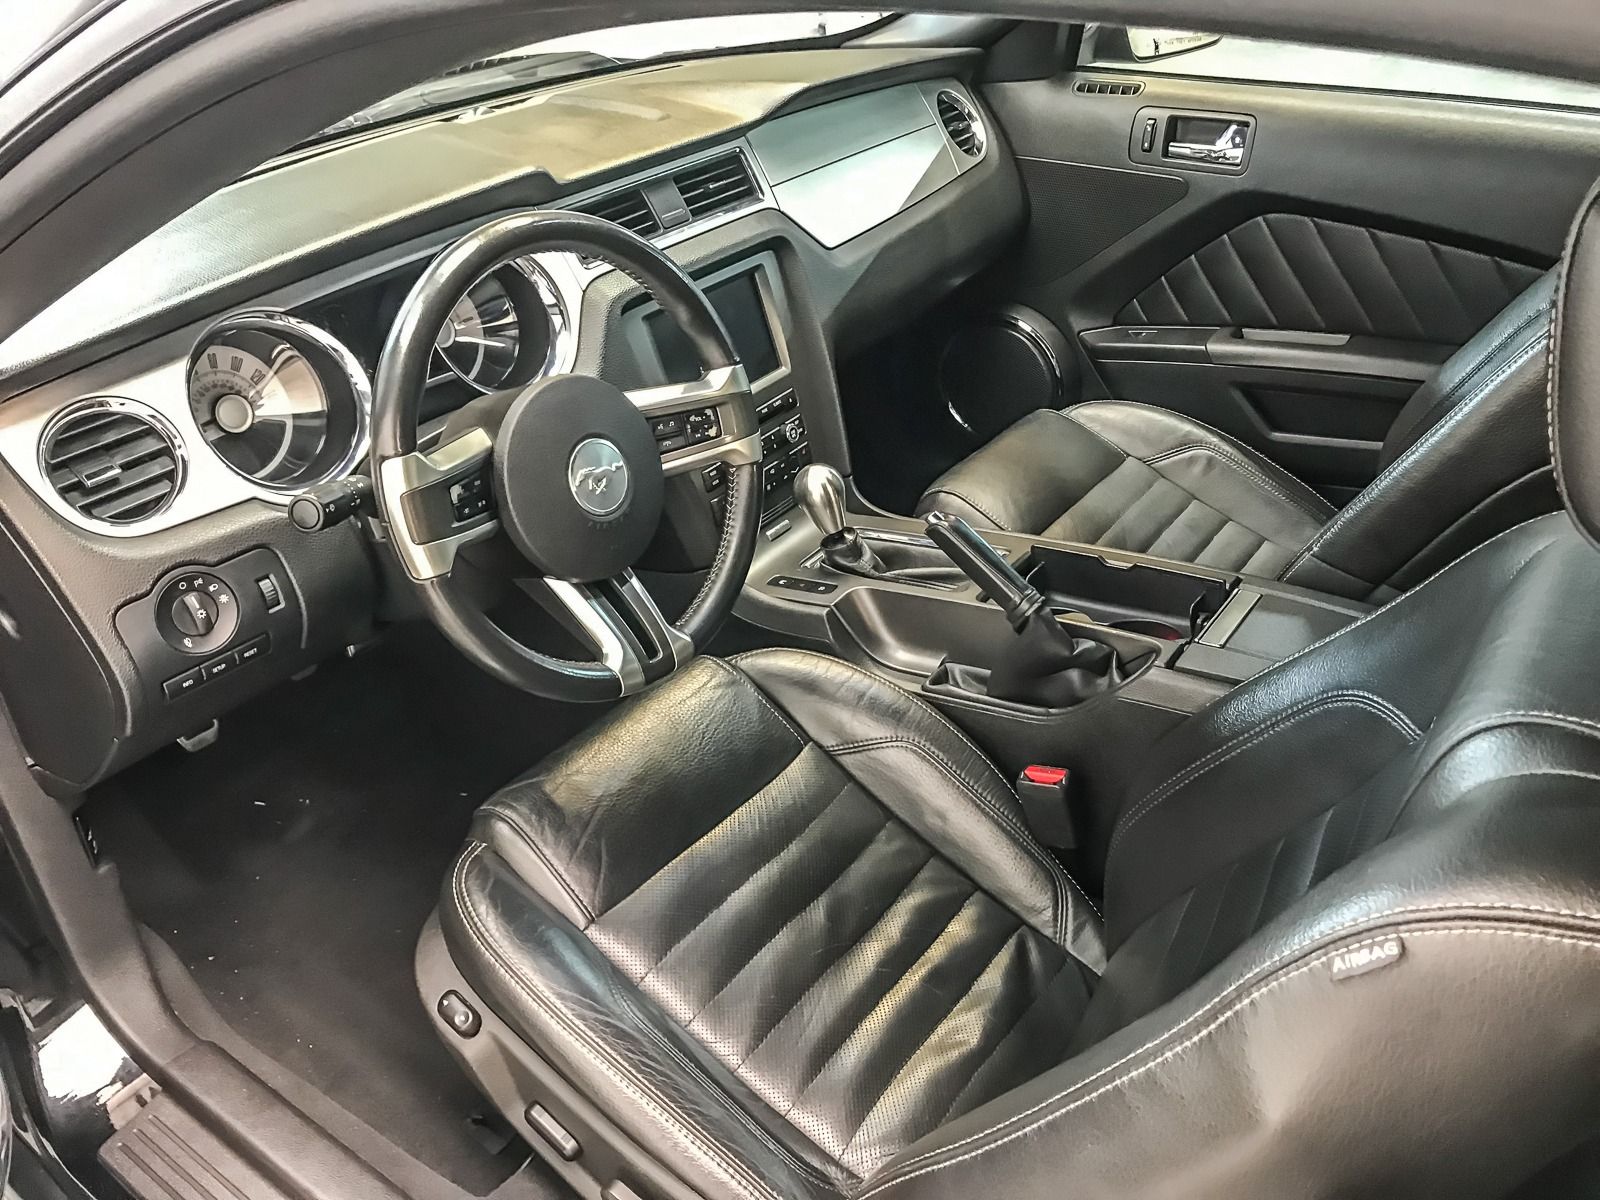 Used 2010 Ford Mustang GT Premium Interior